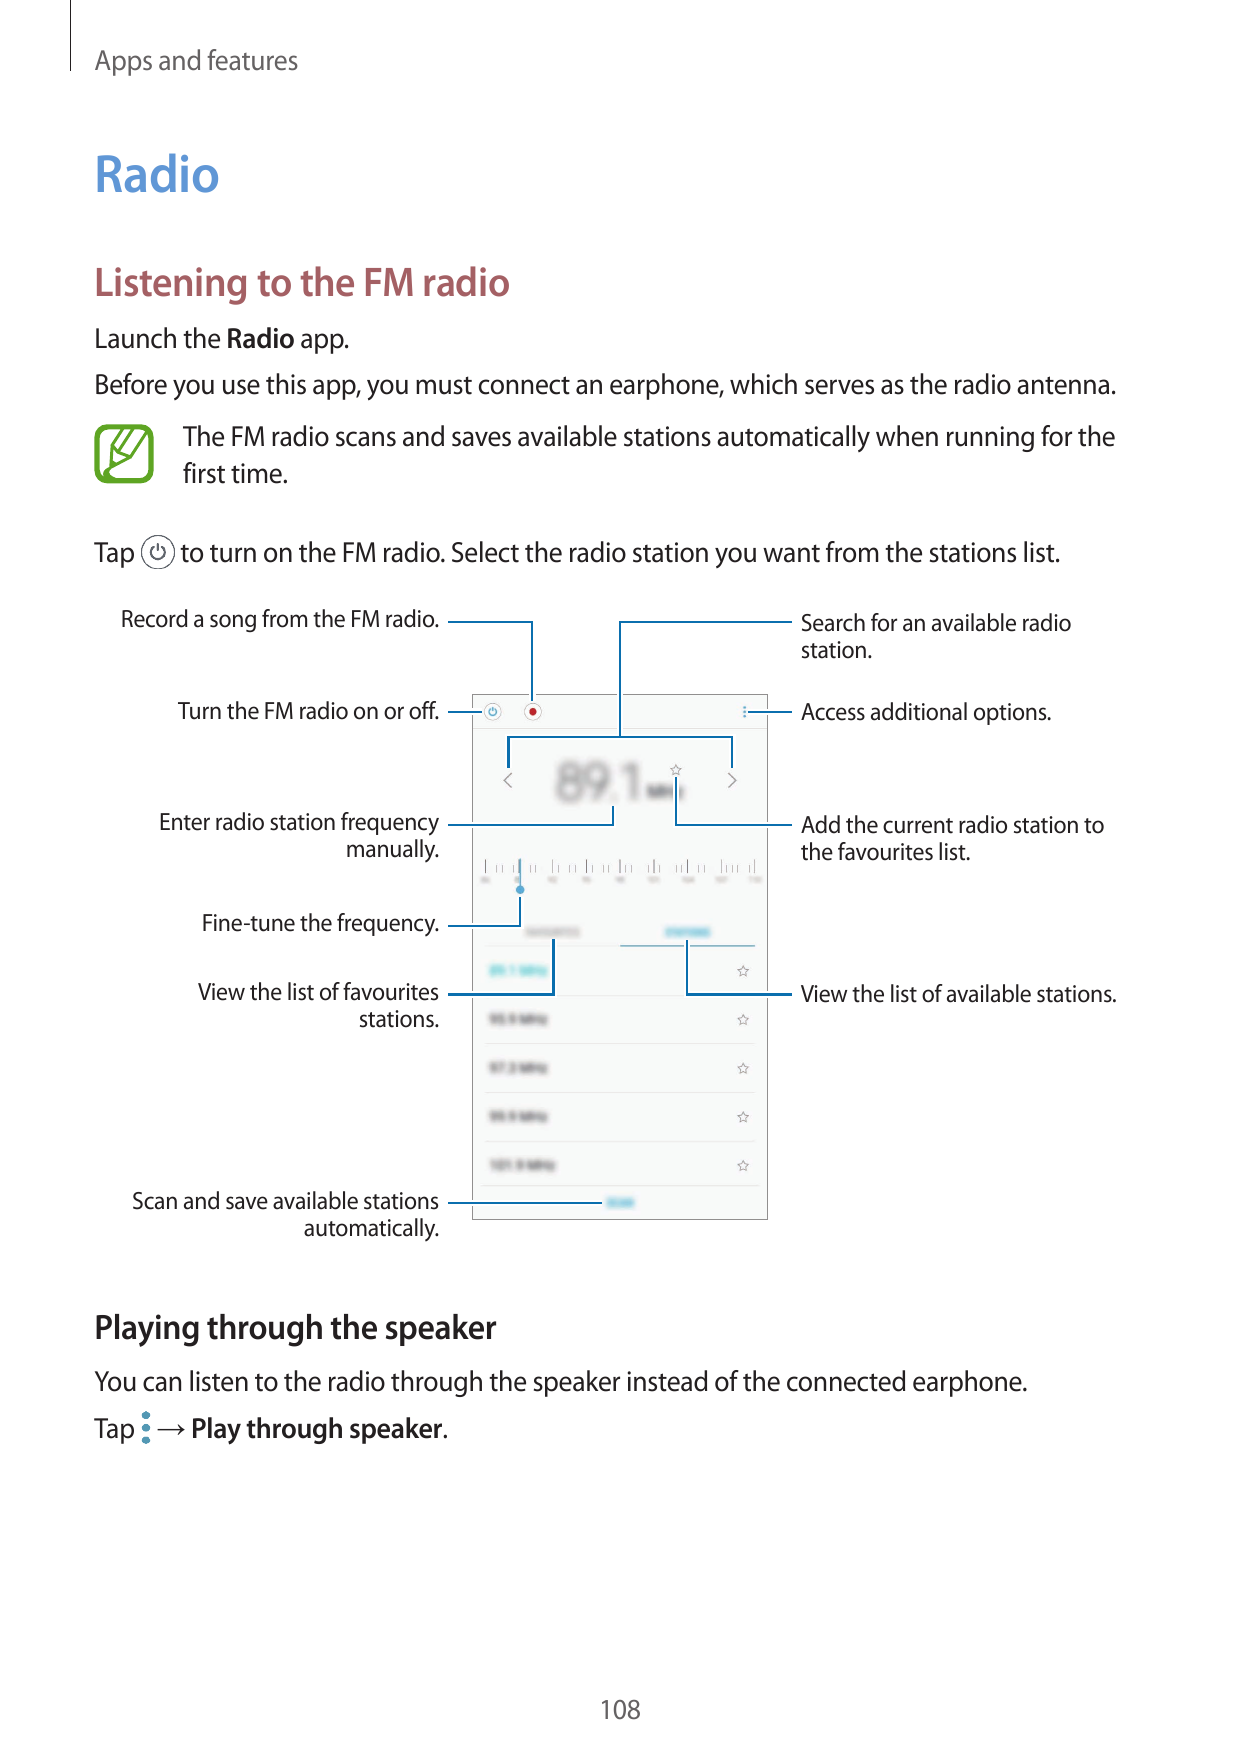 Apps and featuresRadioListening to the FM radioLaunch the Radio app.Before you use this app, you must connect an earphone, which